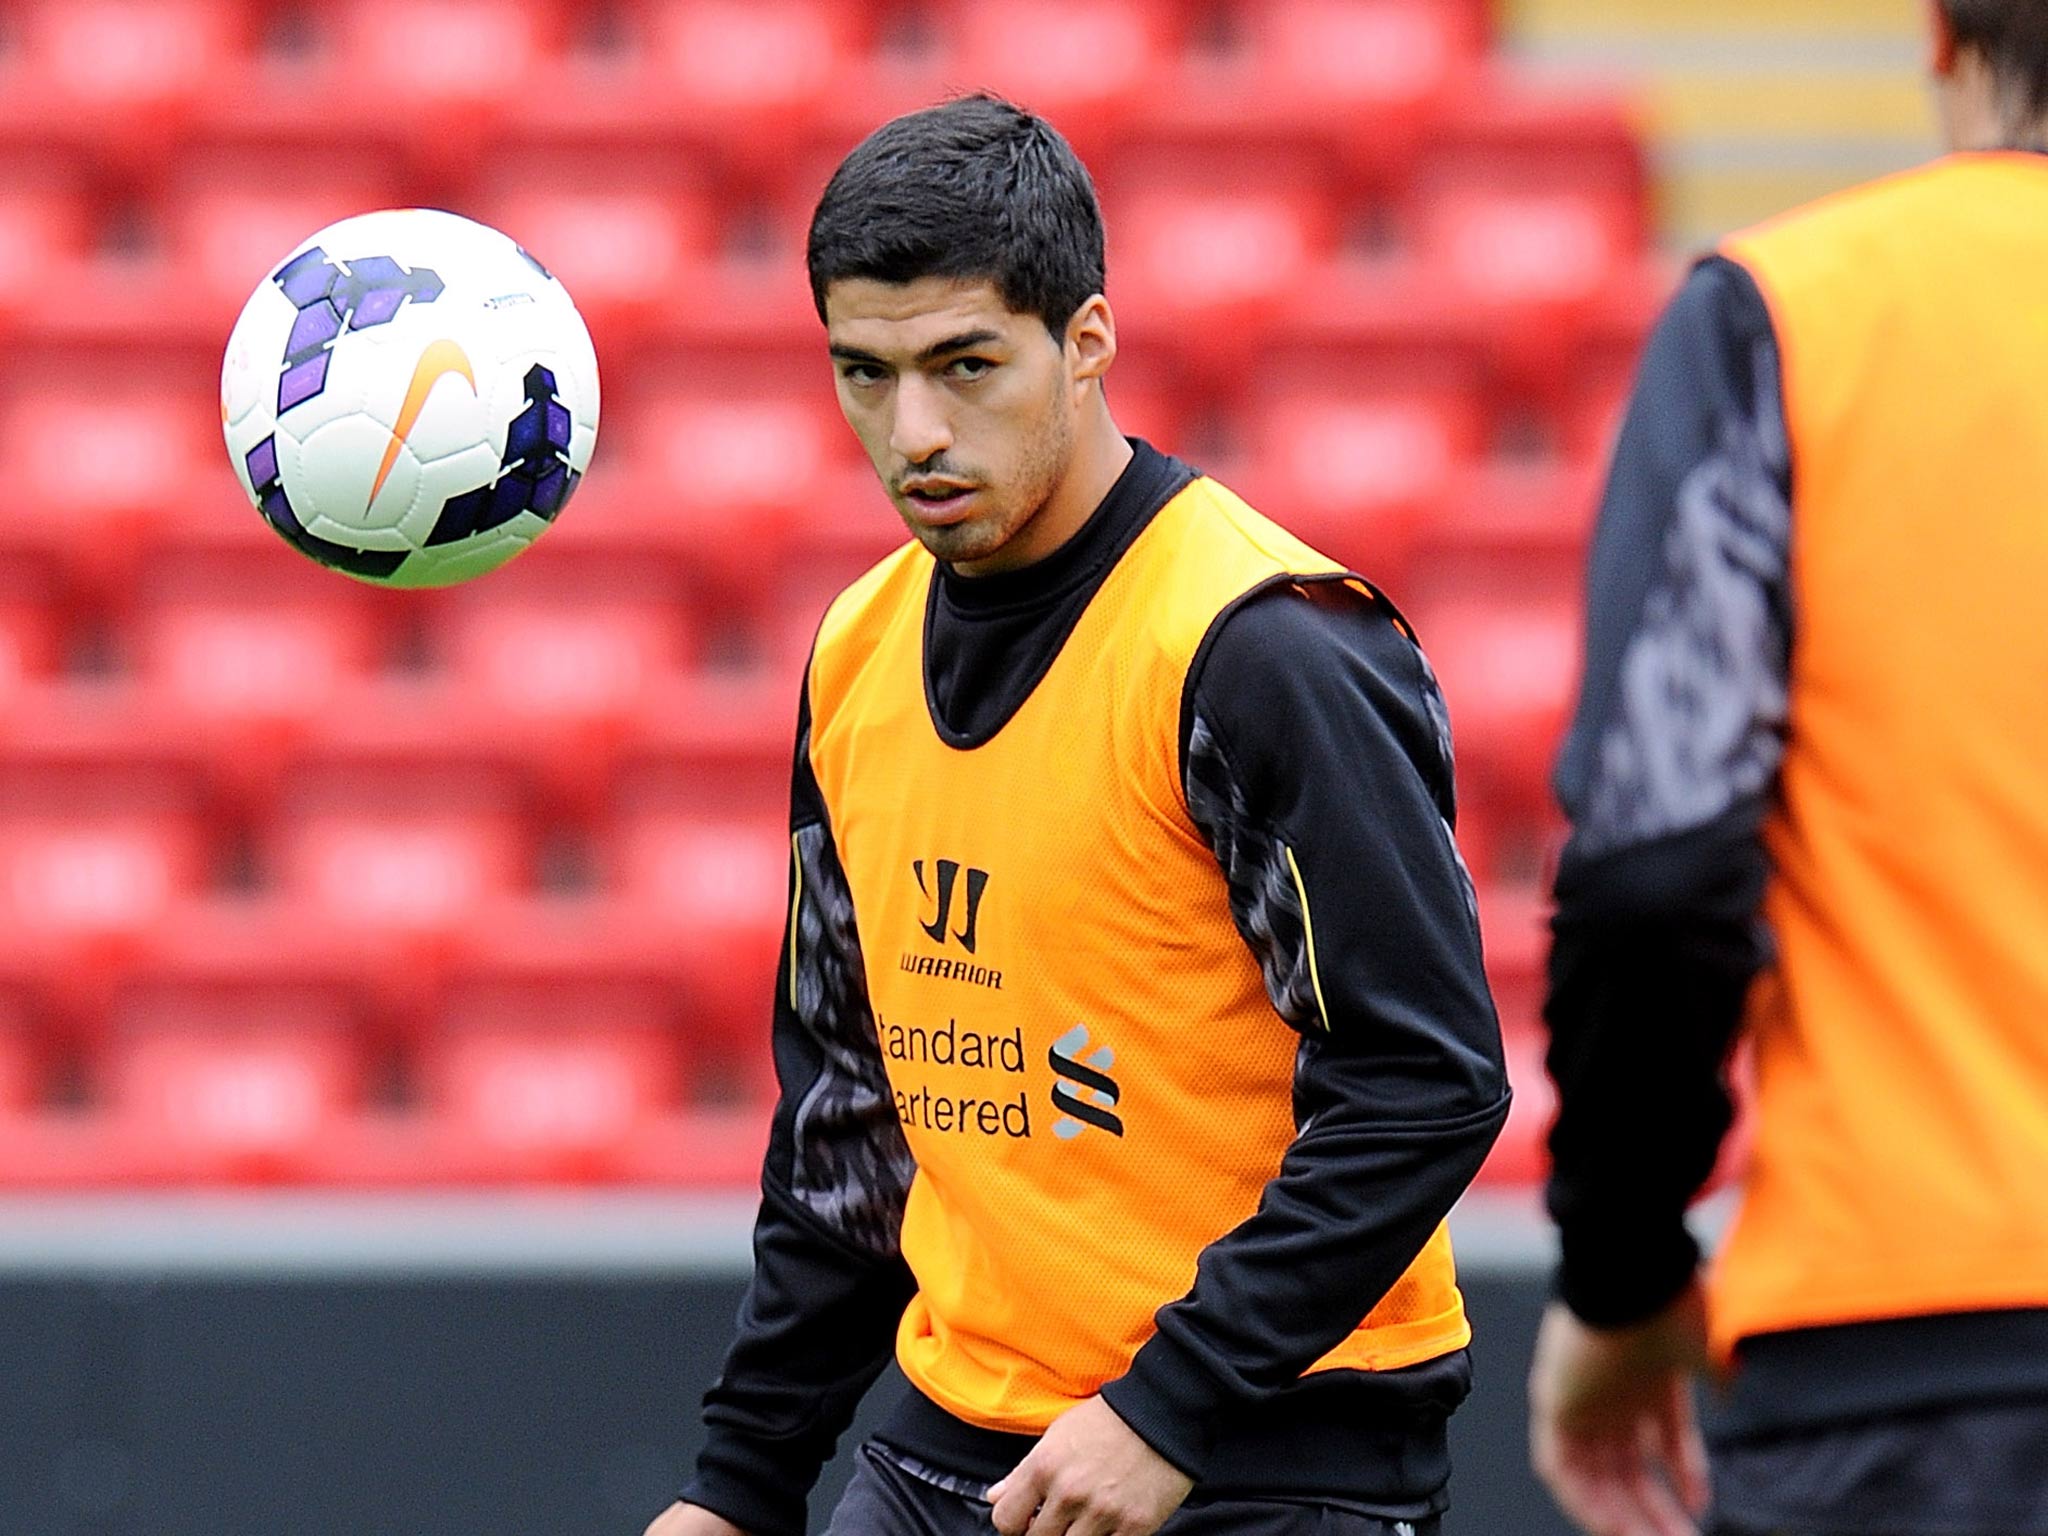 Luis Suarez takes part in an open training session